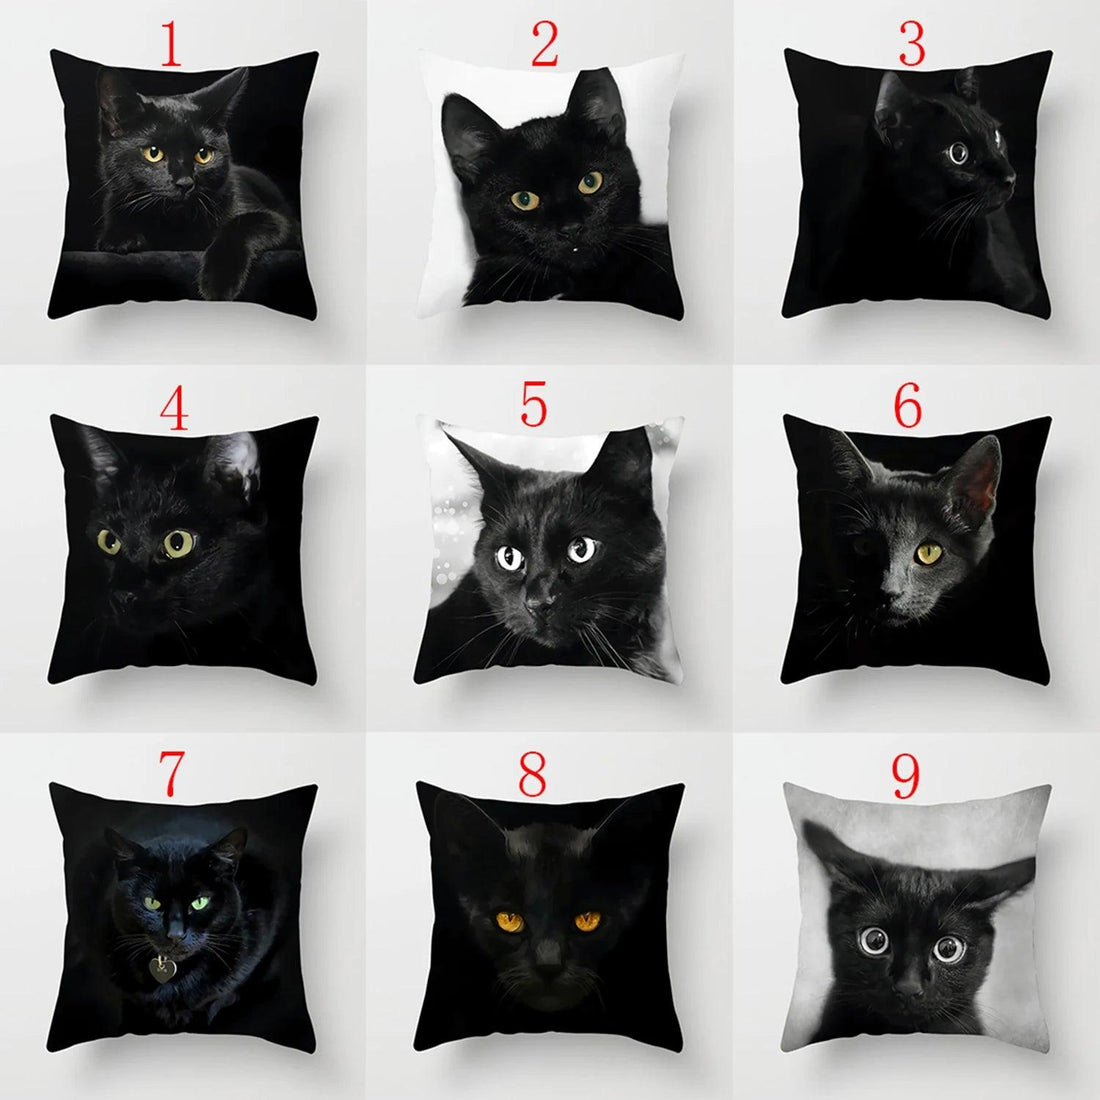 Realistic Black Cat Decorative Pillowcase, 4 sizes, 9 desings - Just Cats - Gifts for Cat Lovers